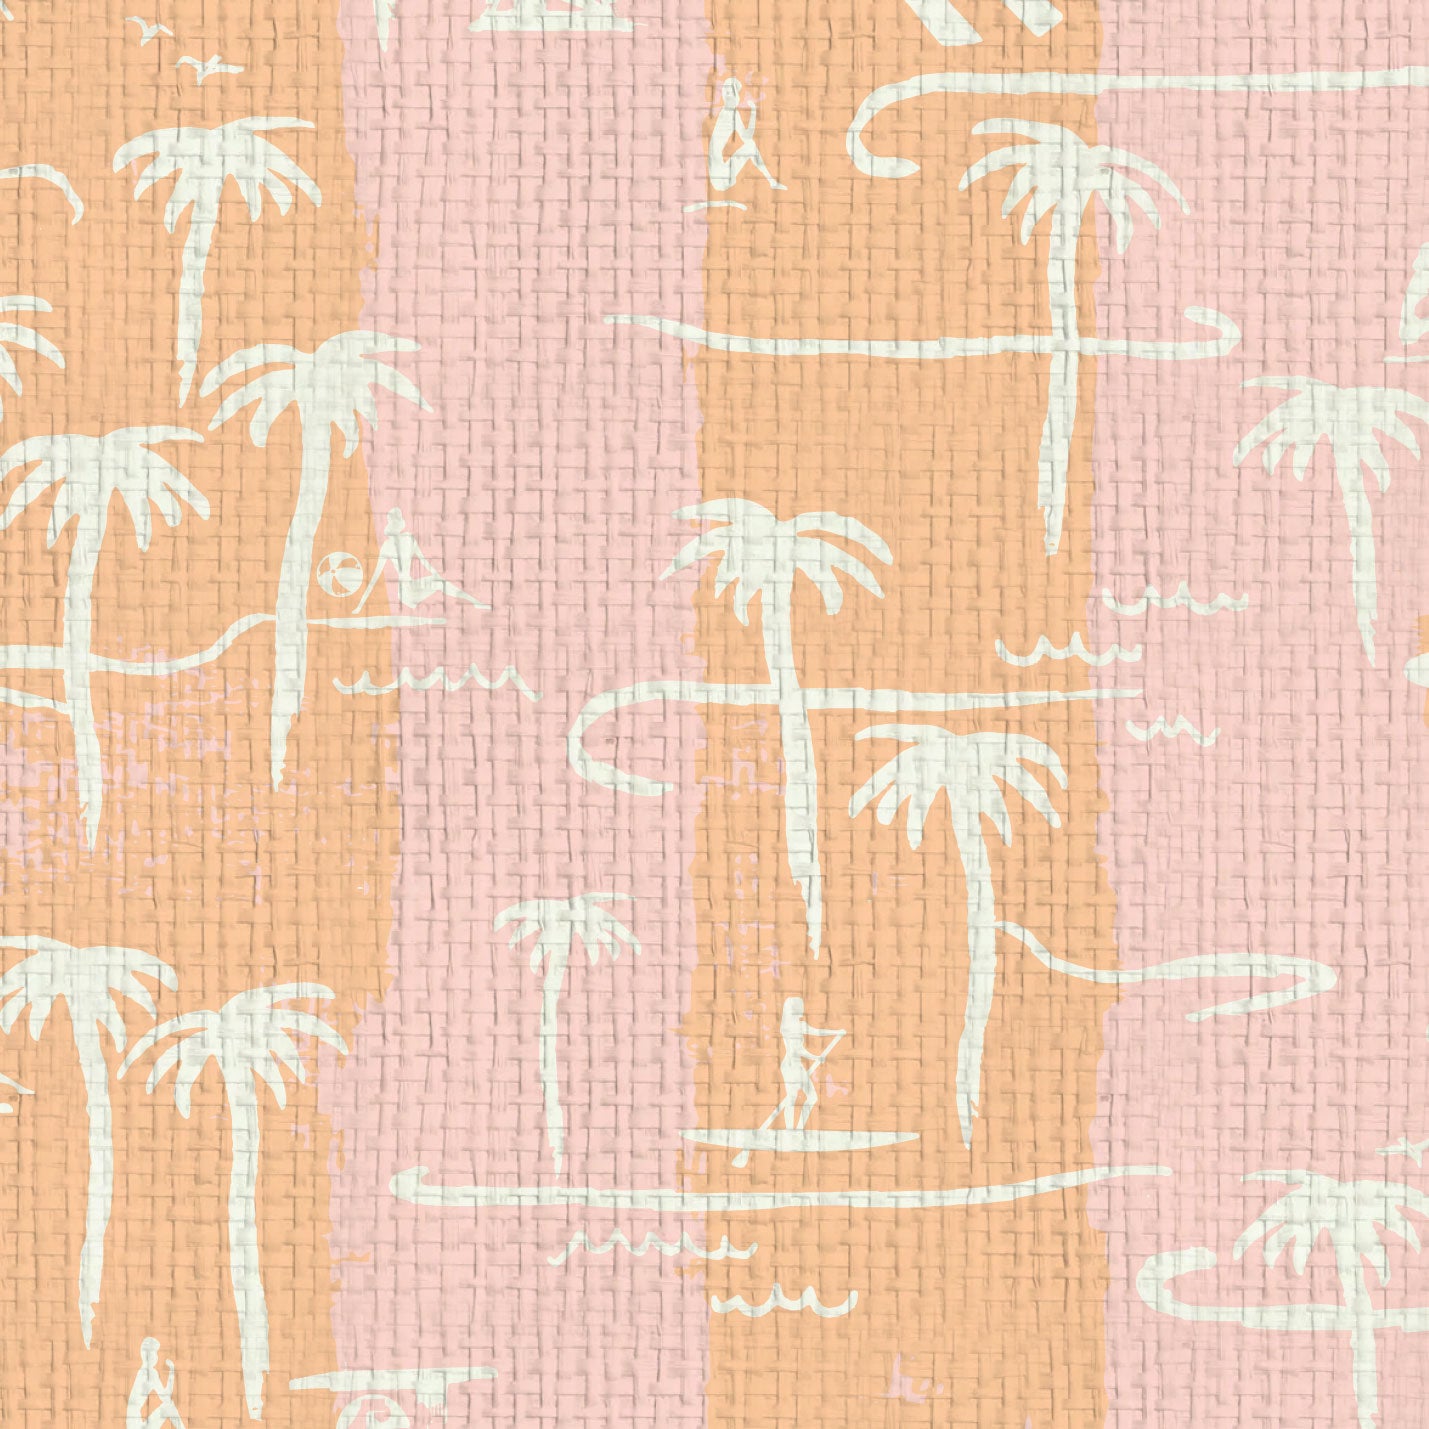 two color vertical stripe beach print featuring palm trees, beachgoers, lifeguard stands and ocean waves Paper weave Natural Textured Eco-Friendly Non-toxic High-quality Sustainable practices Sustainability Interior Design Wall covering Bold Wallpaper Custom Tailor-made Retro chic Tropical Seaside Coastal Seashore Waterfront Vacation home styling Retreat Relaxed beach vibes Beach cottage Shoreline Oceanfront Nautical pink baby orange sunset tangerine corals